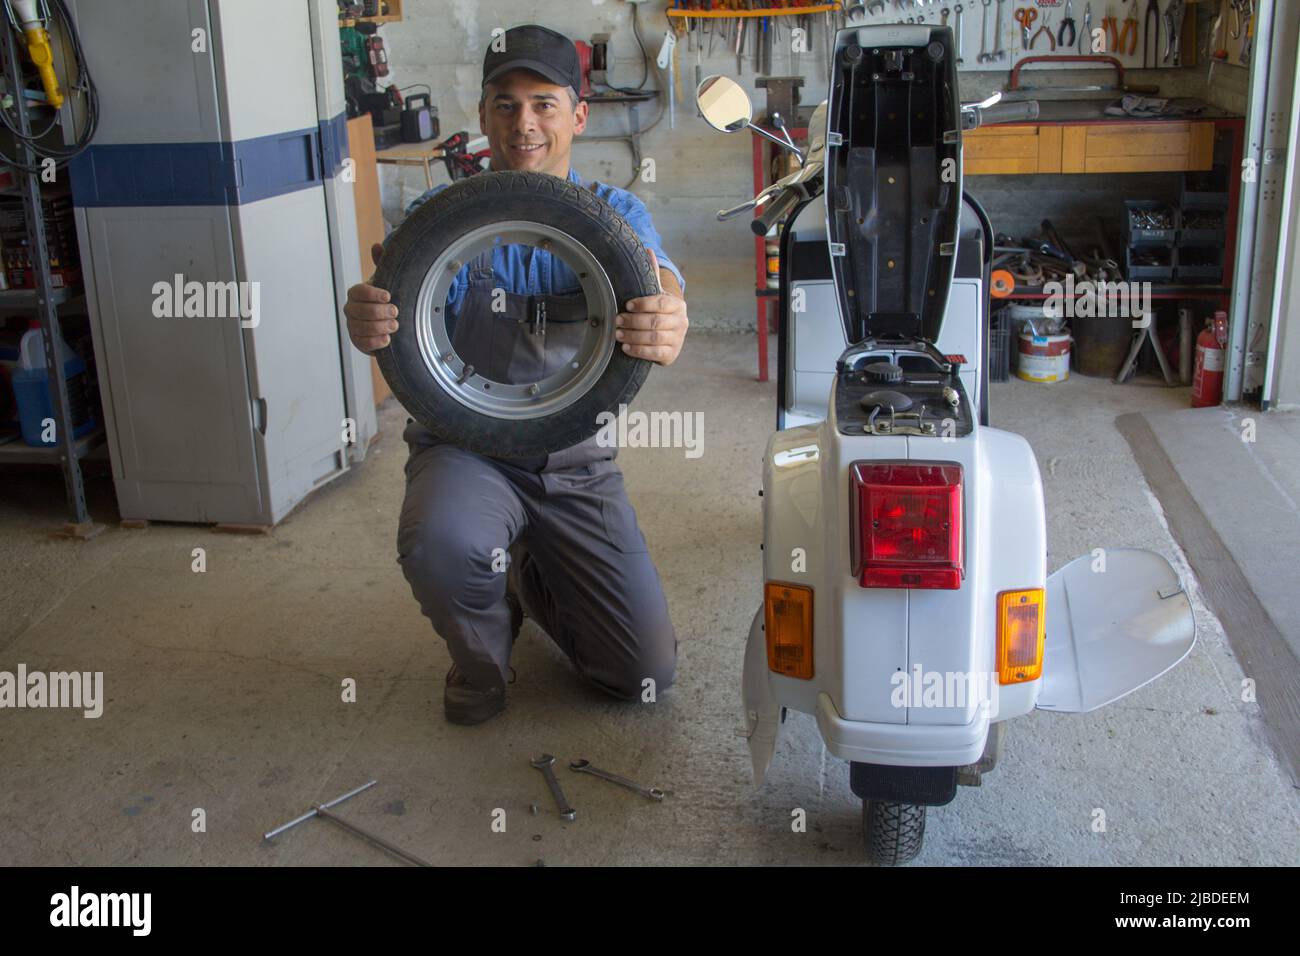 Image of a smiling mechanic in his workshop holding a wheel of the motorcycle he is repairing. Stock Photo